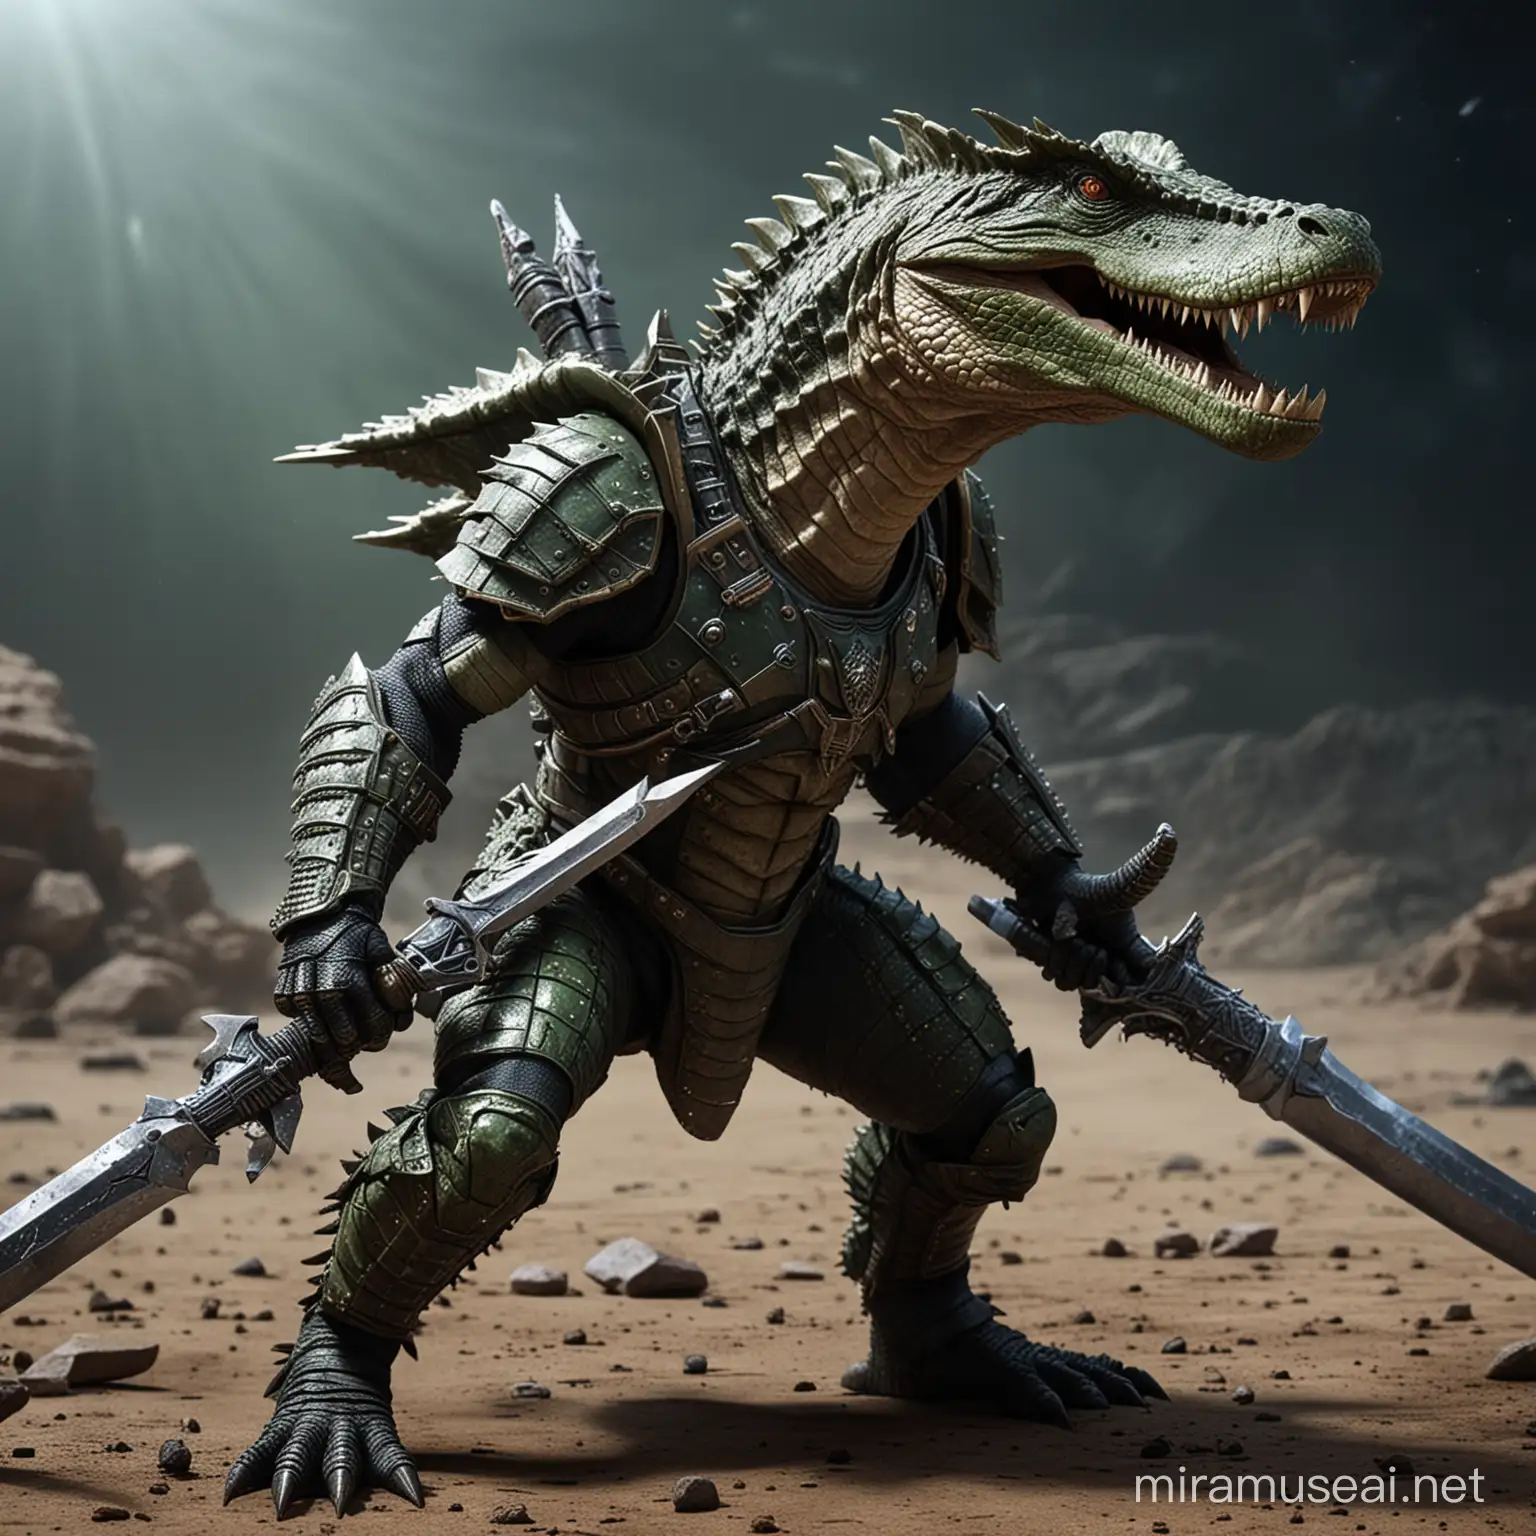 Rugged Alien Reptile Warrior in Space Armor with Sword